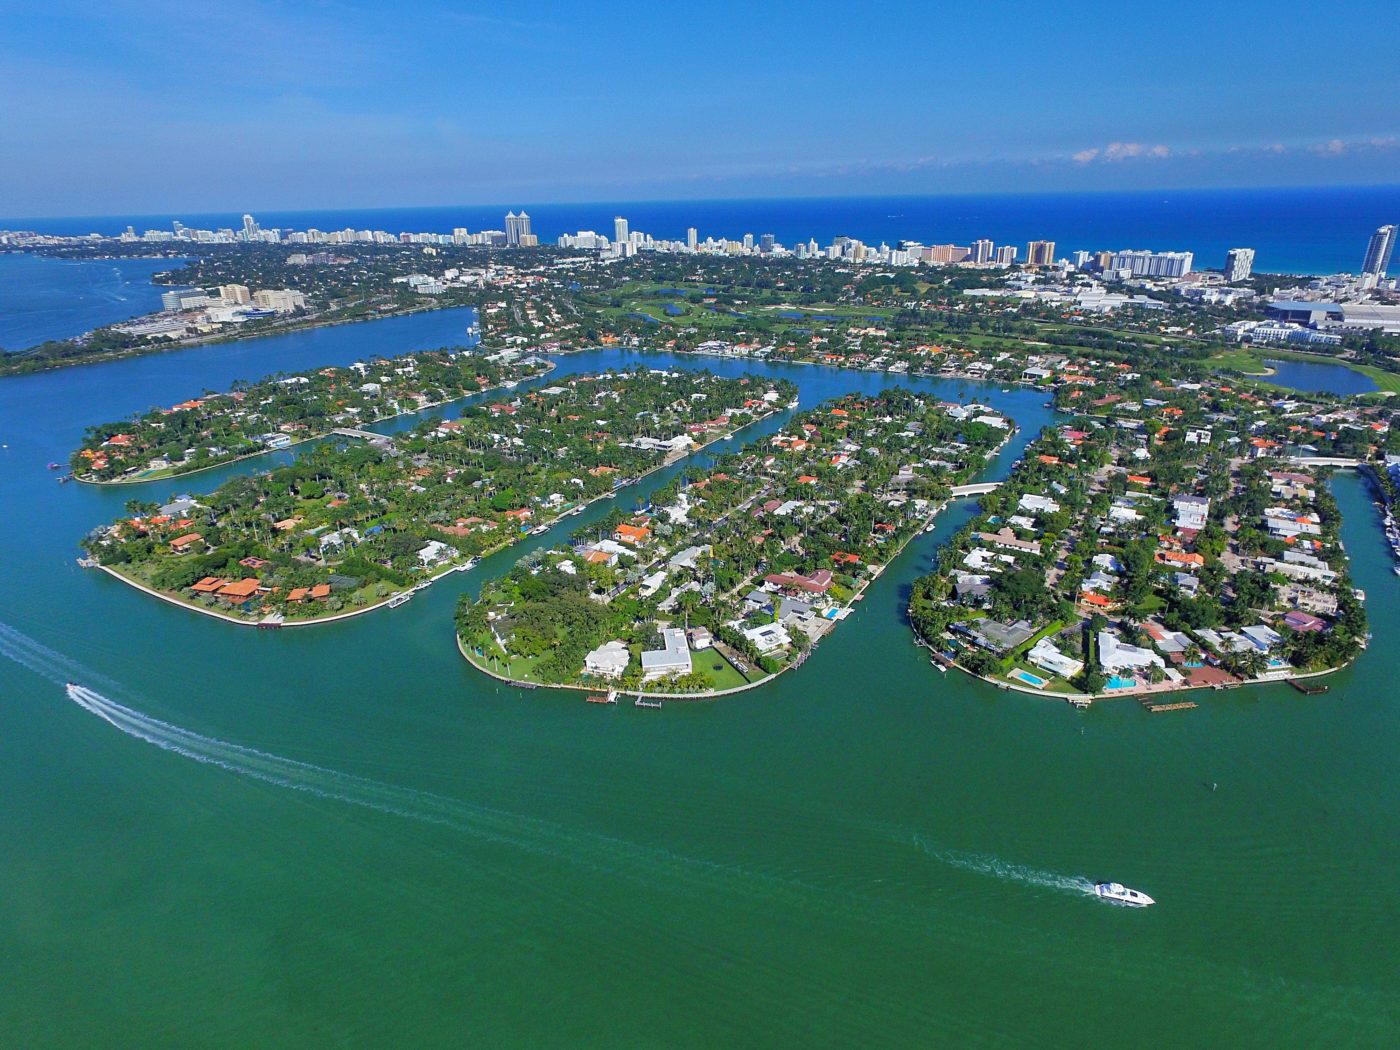 What Makes Sunset Islands In Miami Beach The Perfect Place To Live?